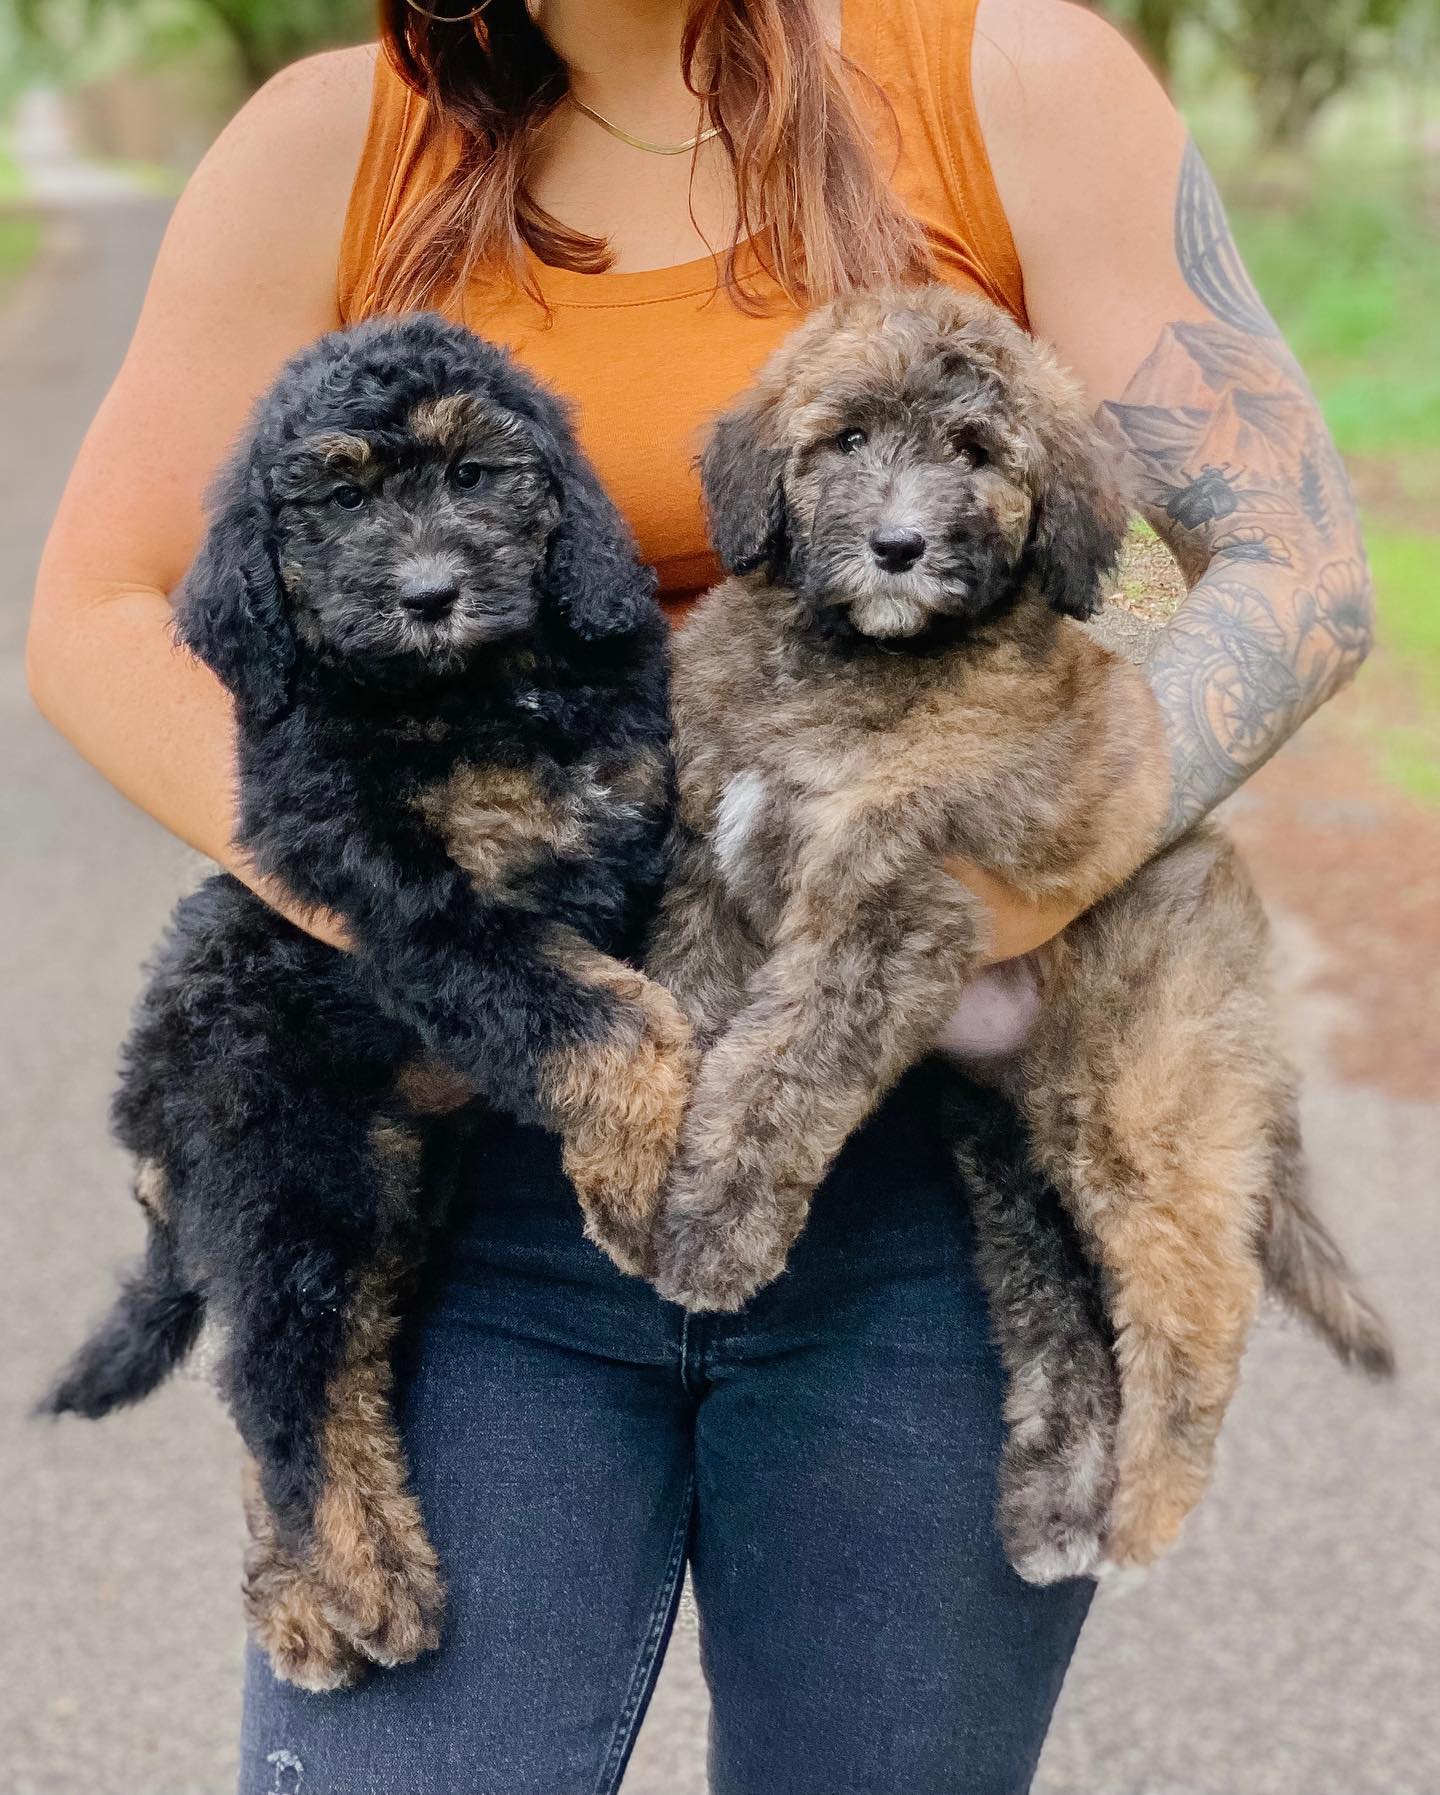 The image of Taylor holding Smeraglia teddy bear golden doodles rare puppies is a cute and heartwarming sight. The little puppies are precious, and it's clear that Taylor loves them dearly. You can get any of the rare-marked goldendoodles at Smeraglia Teddybear Goldendoodles